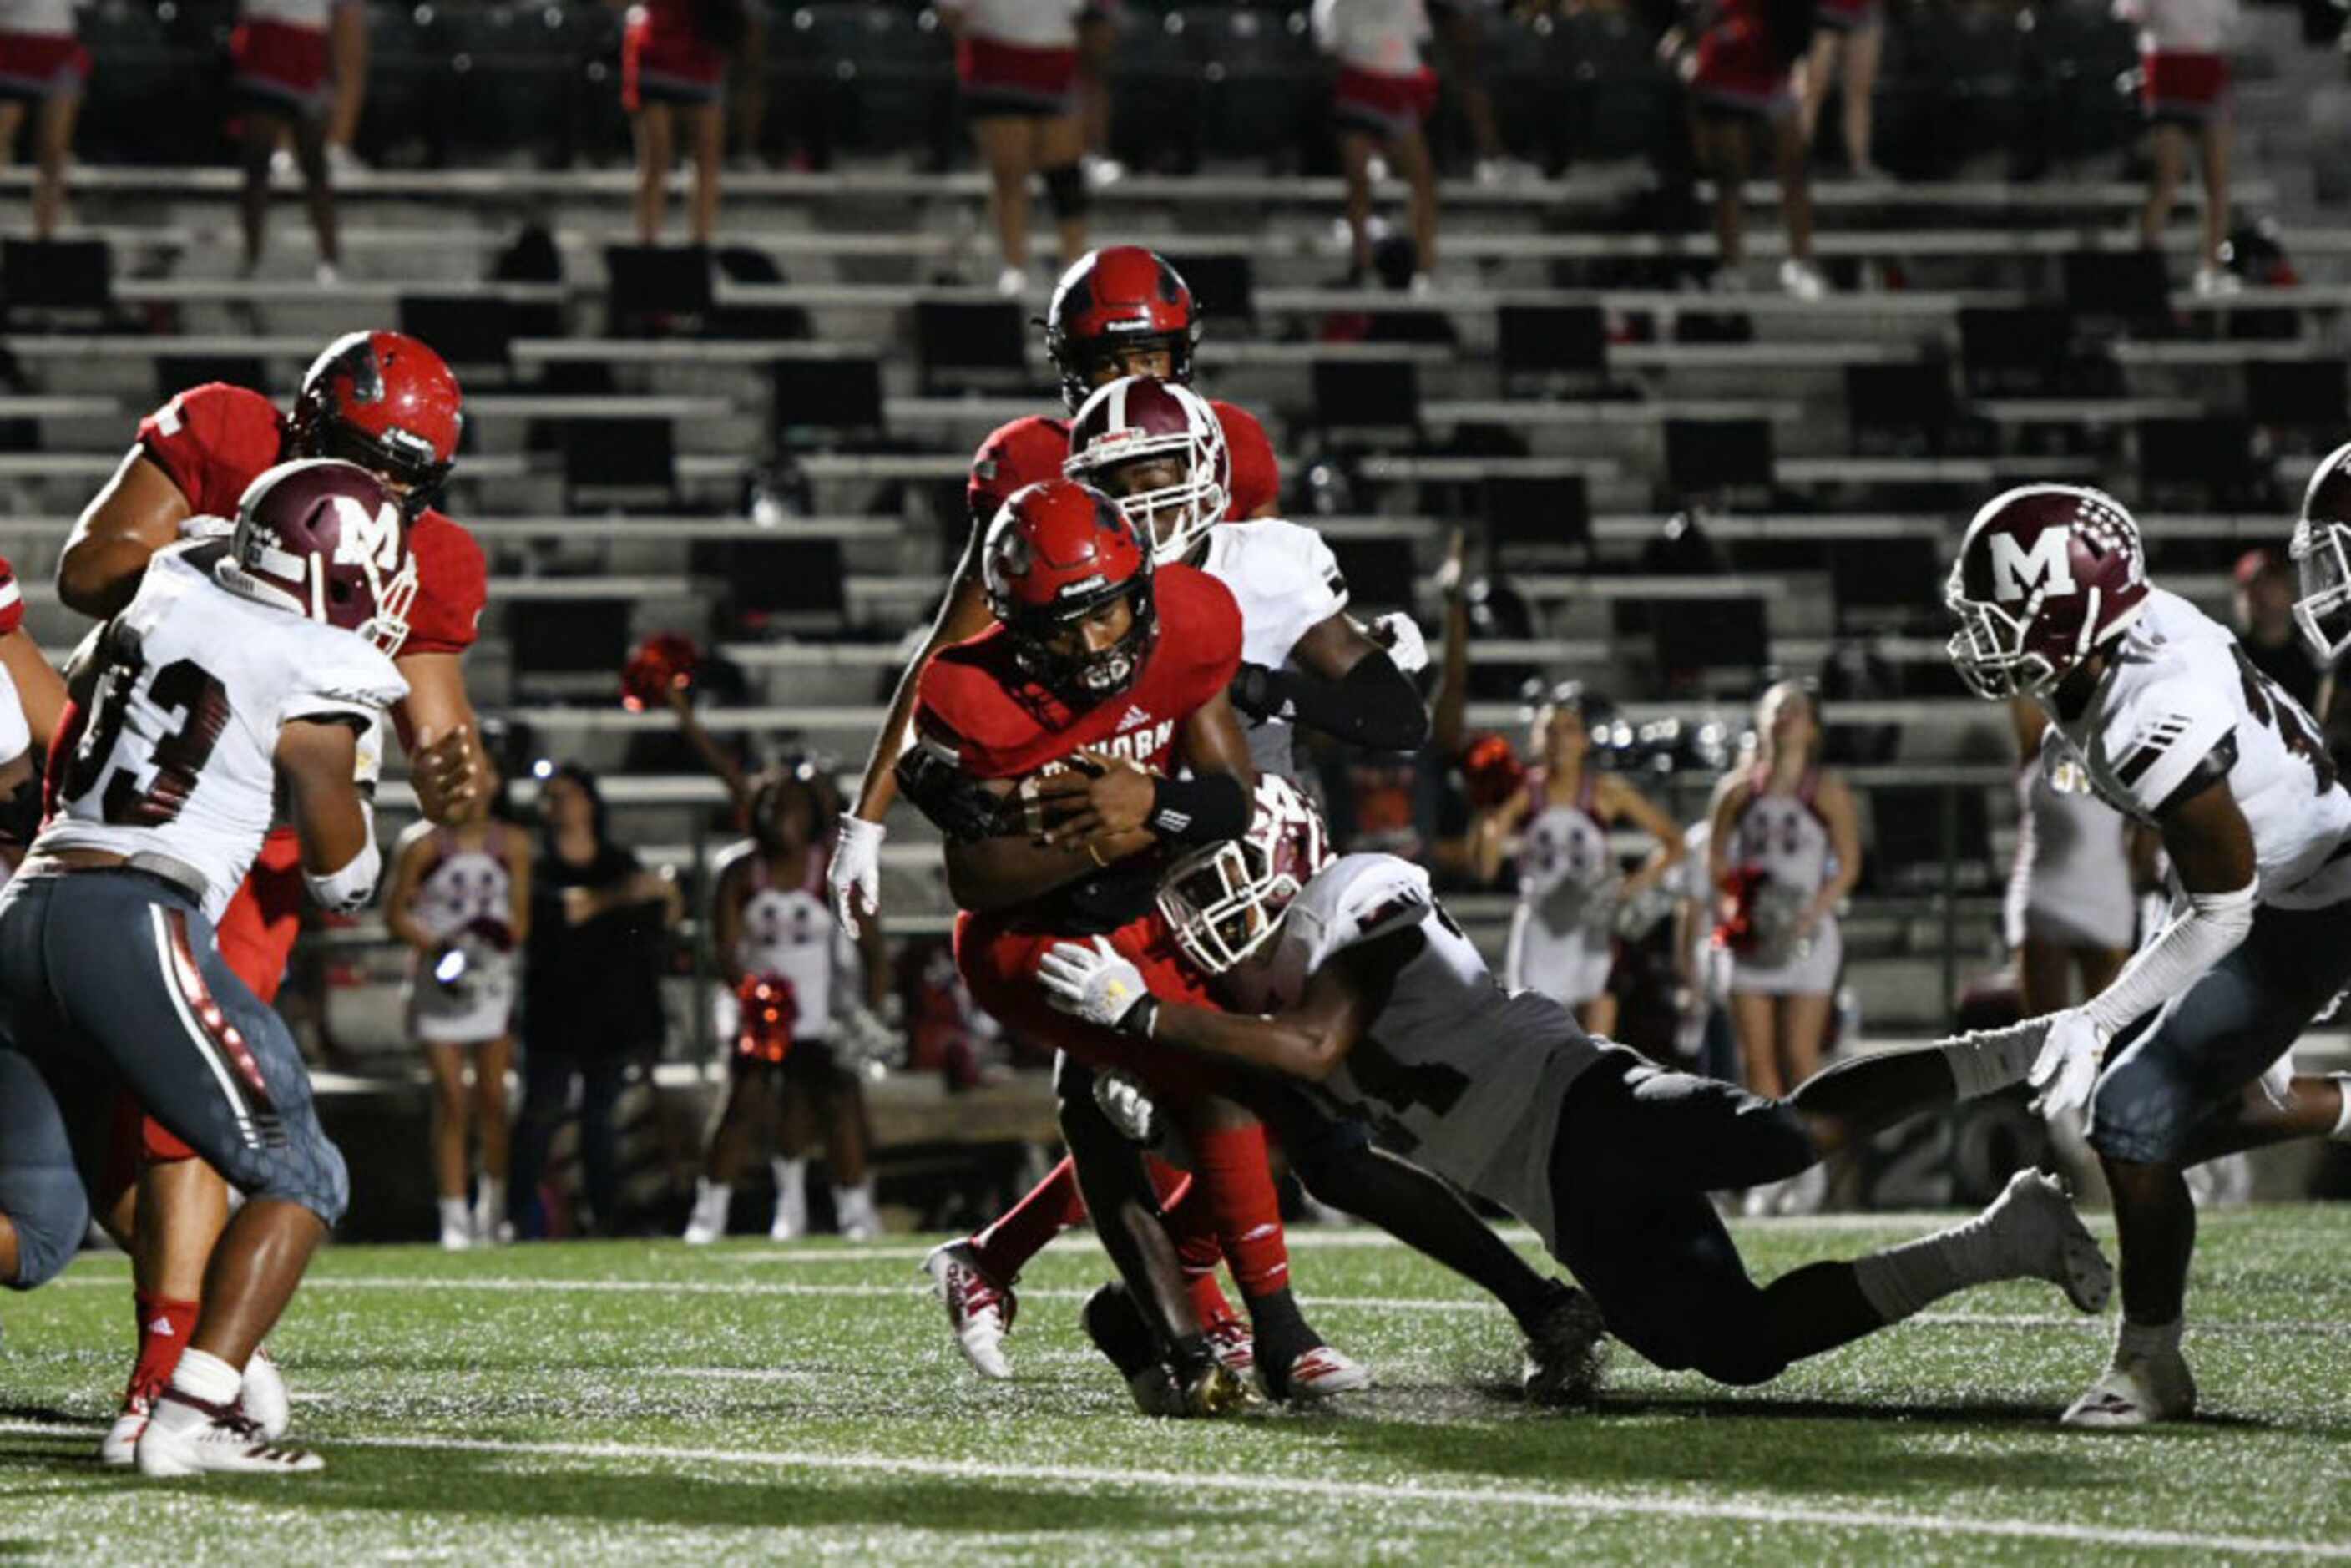 Mesquite Horn's Davazea Gabriel scores the first touchdown of the game against Mesquite...